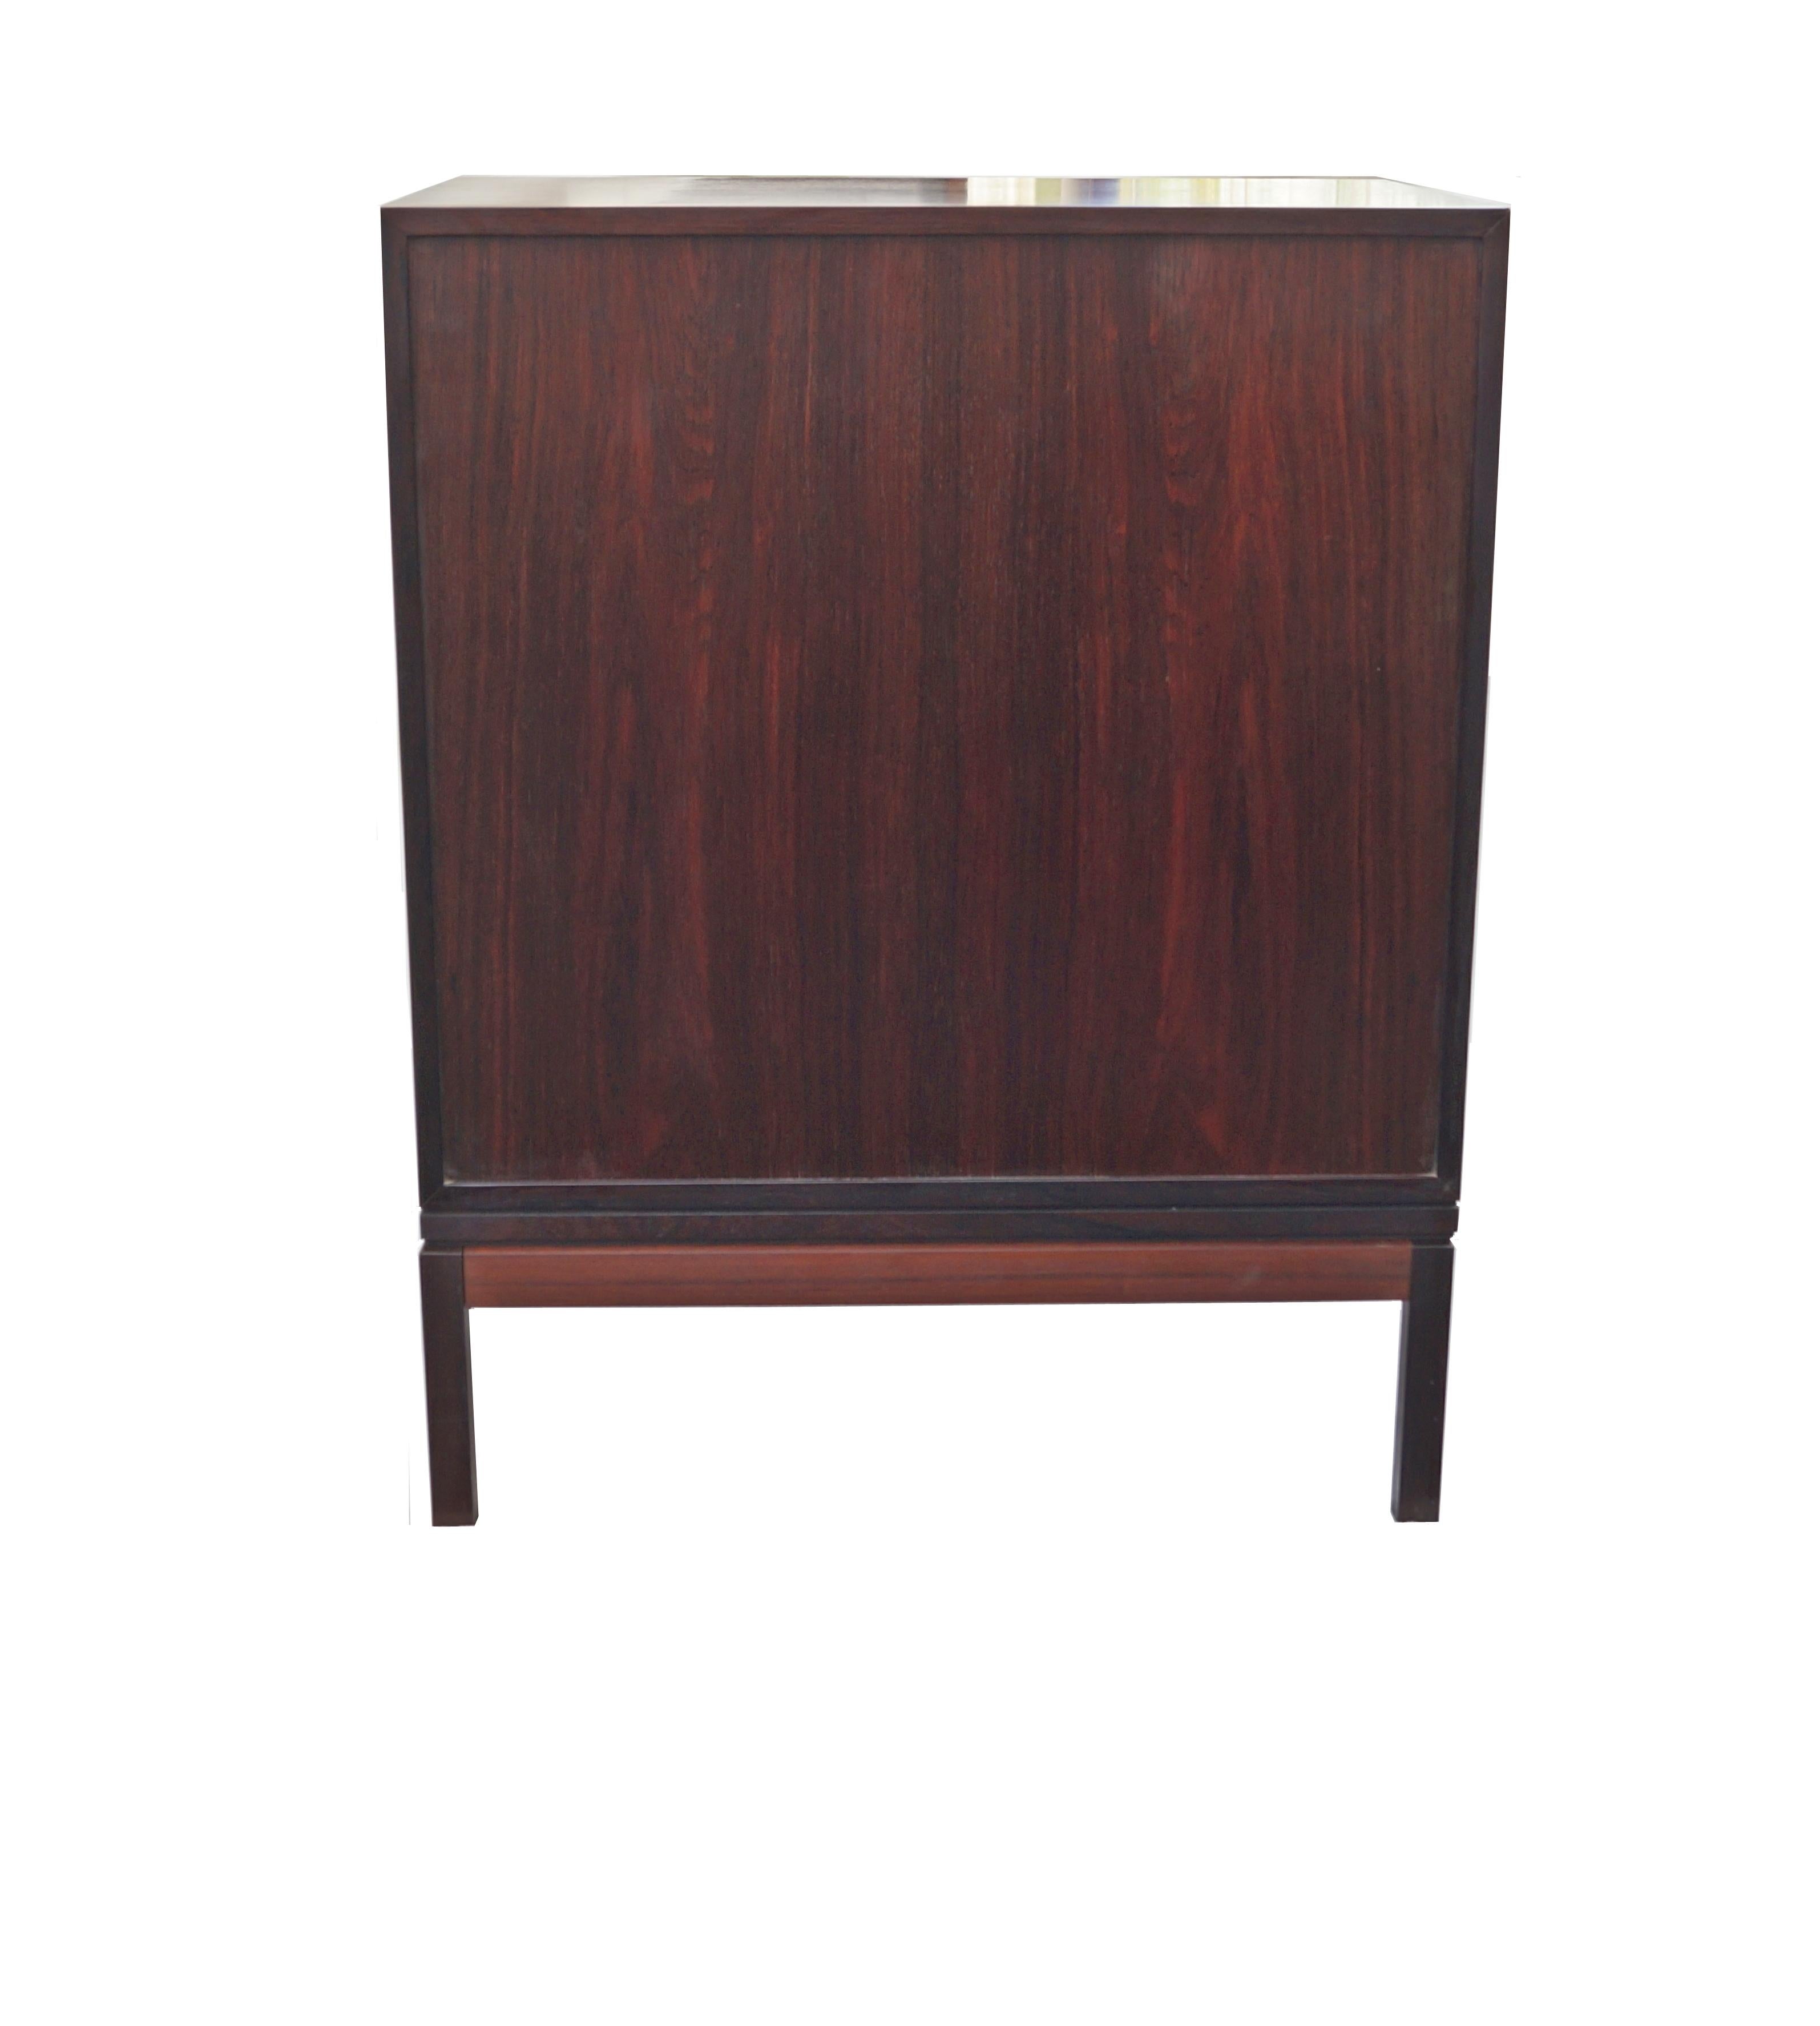 Henning Korch Rosewood Danish Modern Jewelry Lingerie Chest Dresser Flat File In Good Condition For Sale In Wayne, NJ